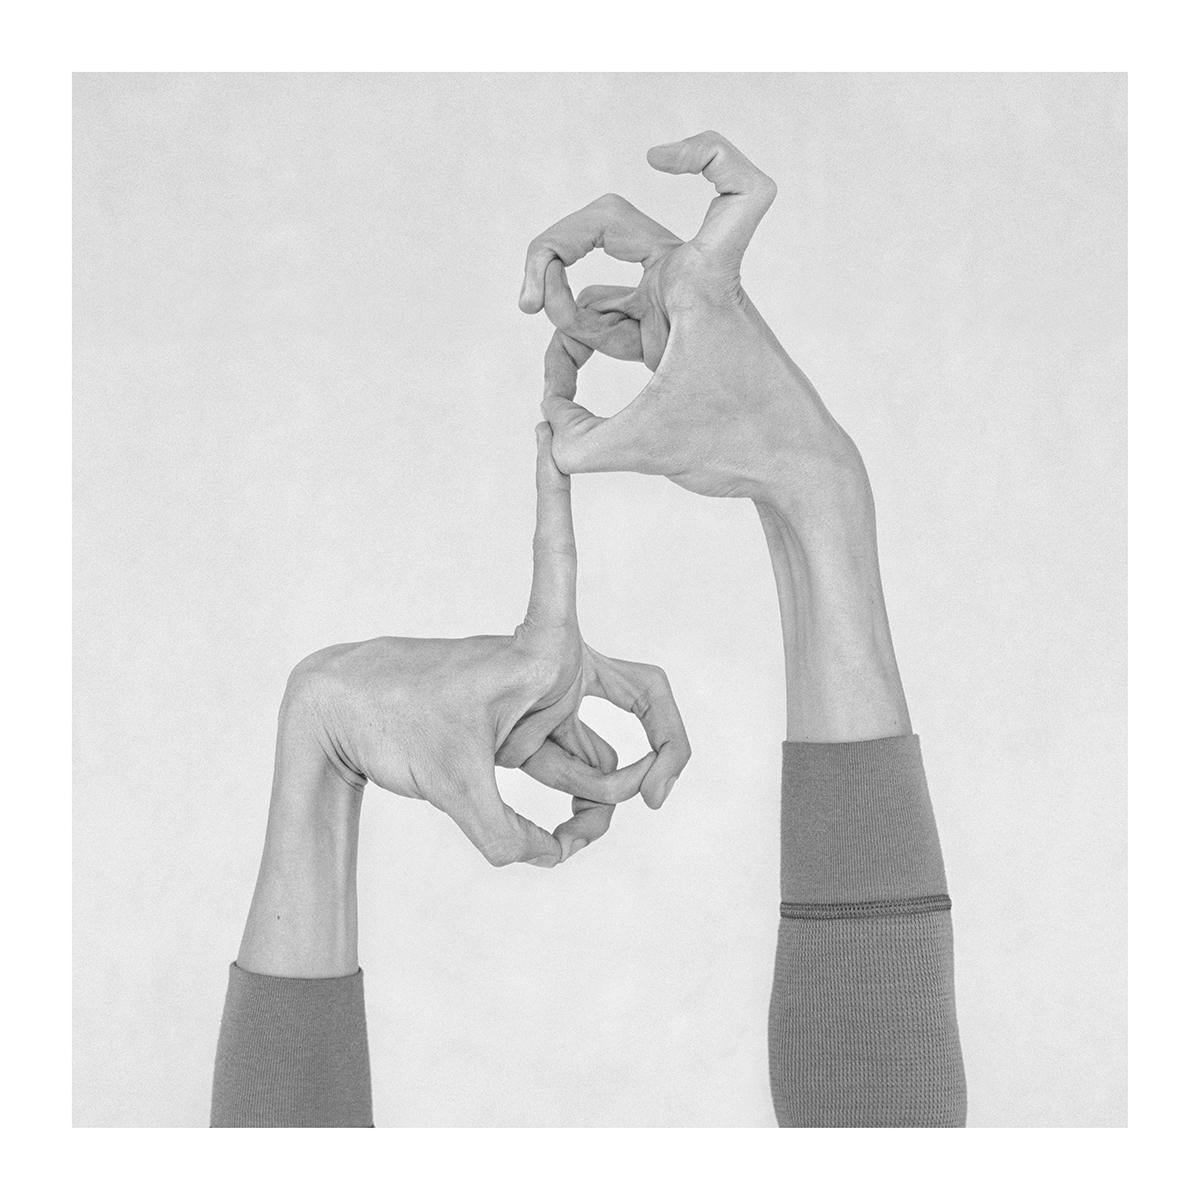 Nico Baixas / Gos-com-fuig Black and White Photograph - Untitled XIX. From the Series Chiromorphose. Hands. Black & White Photography